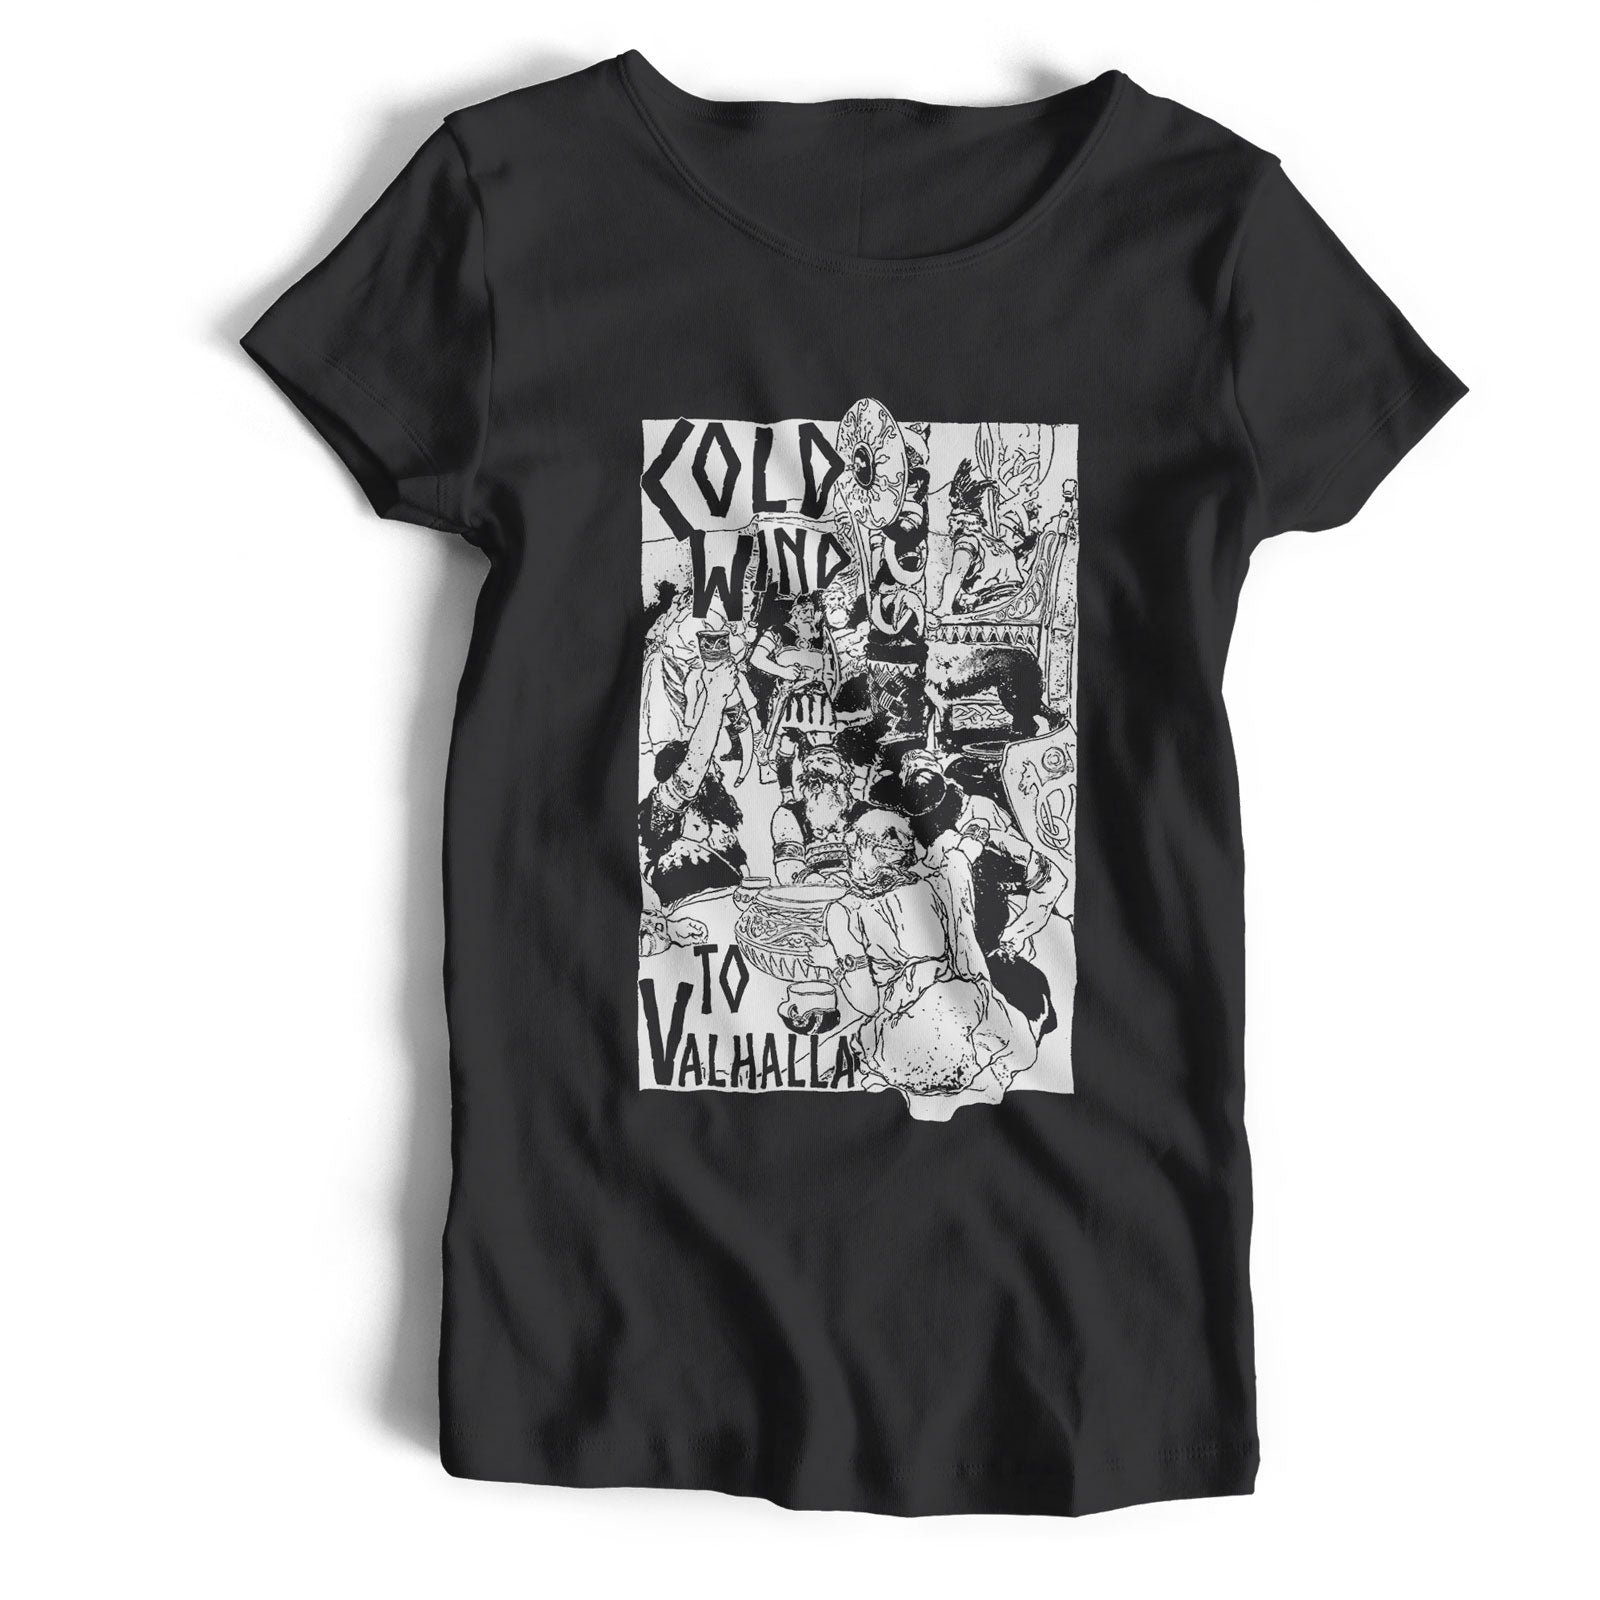 Inspired by Jethro Tull T Shirt - Cold Wind To Valhalla Poster T Shirt